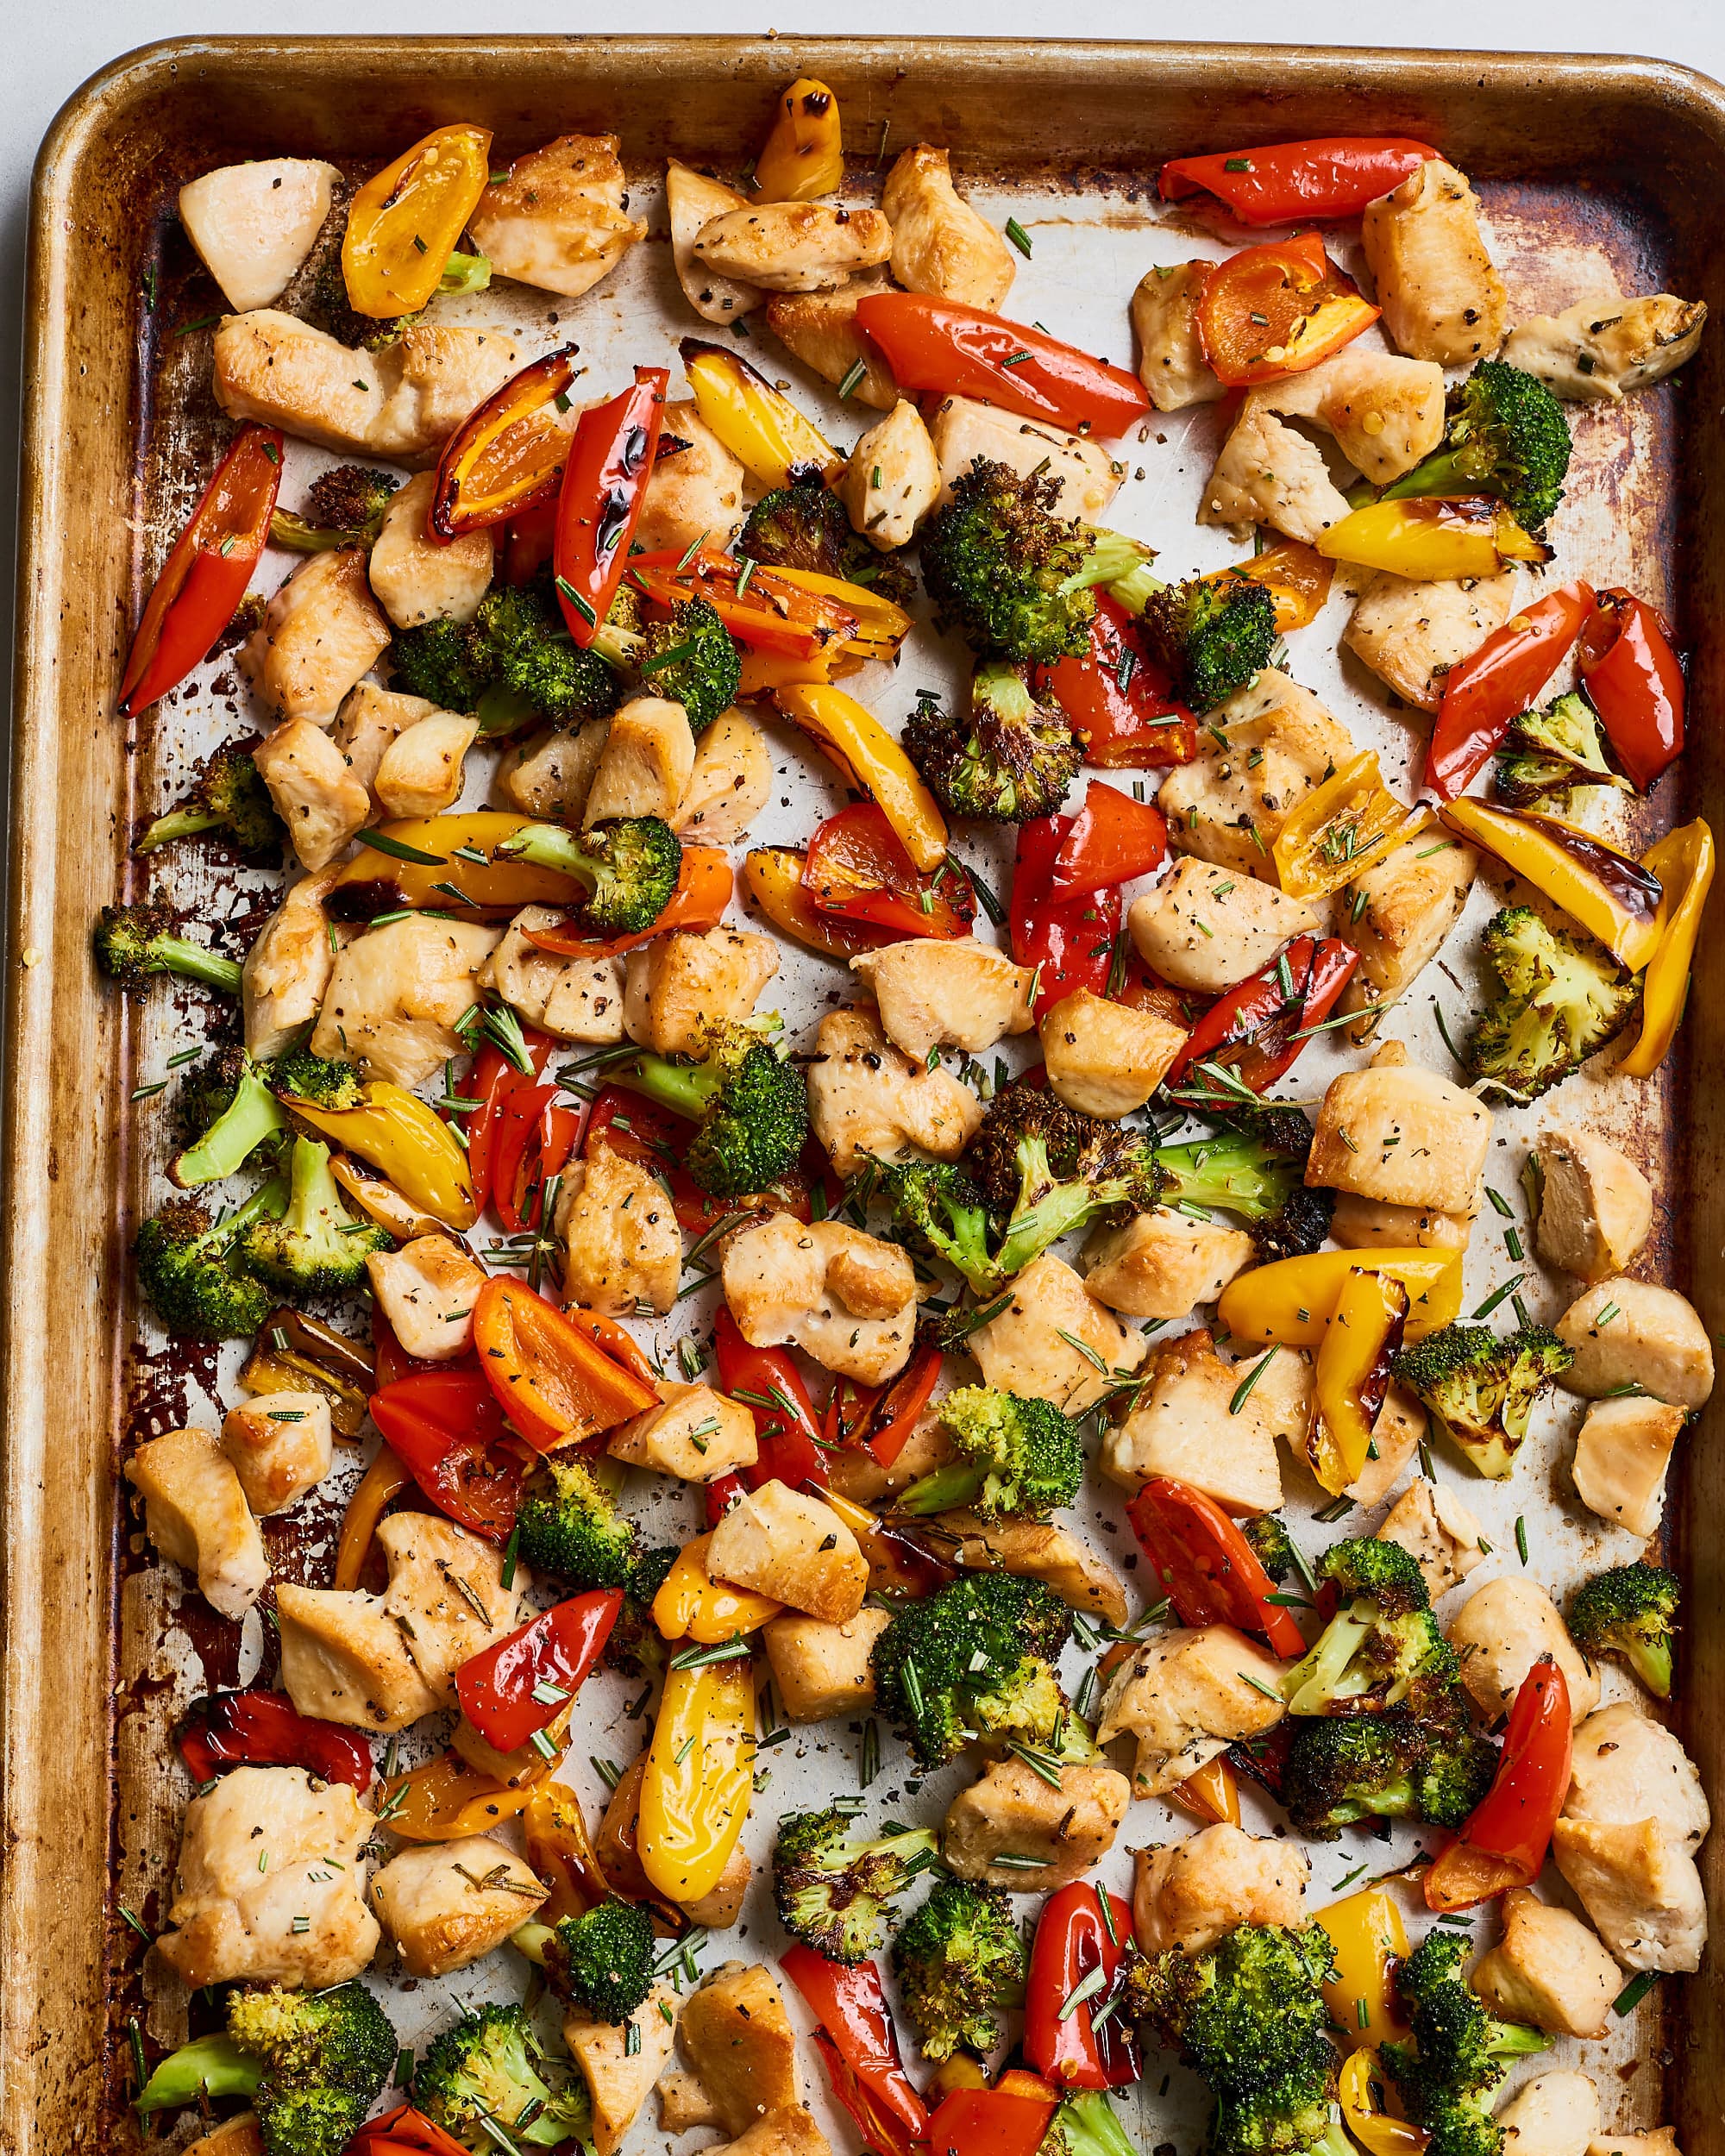 50+ Best Quick and Easy Sheet Pan Recipes, Recipes, Dinners and Easy Meal  Ideas